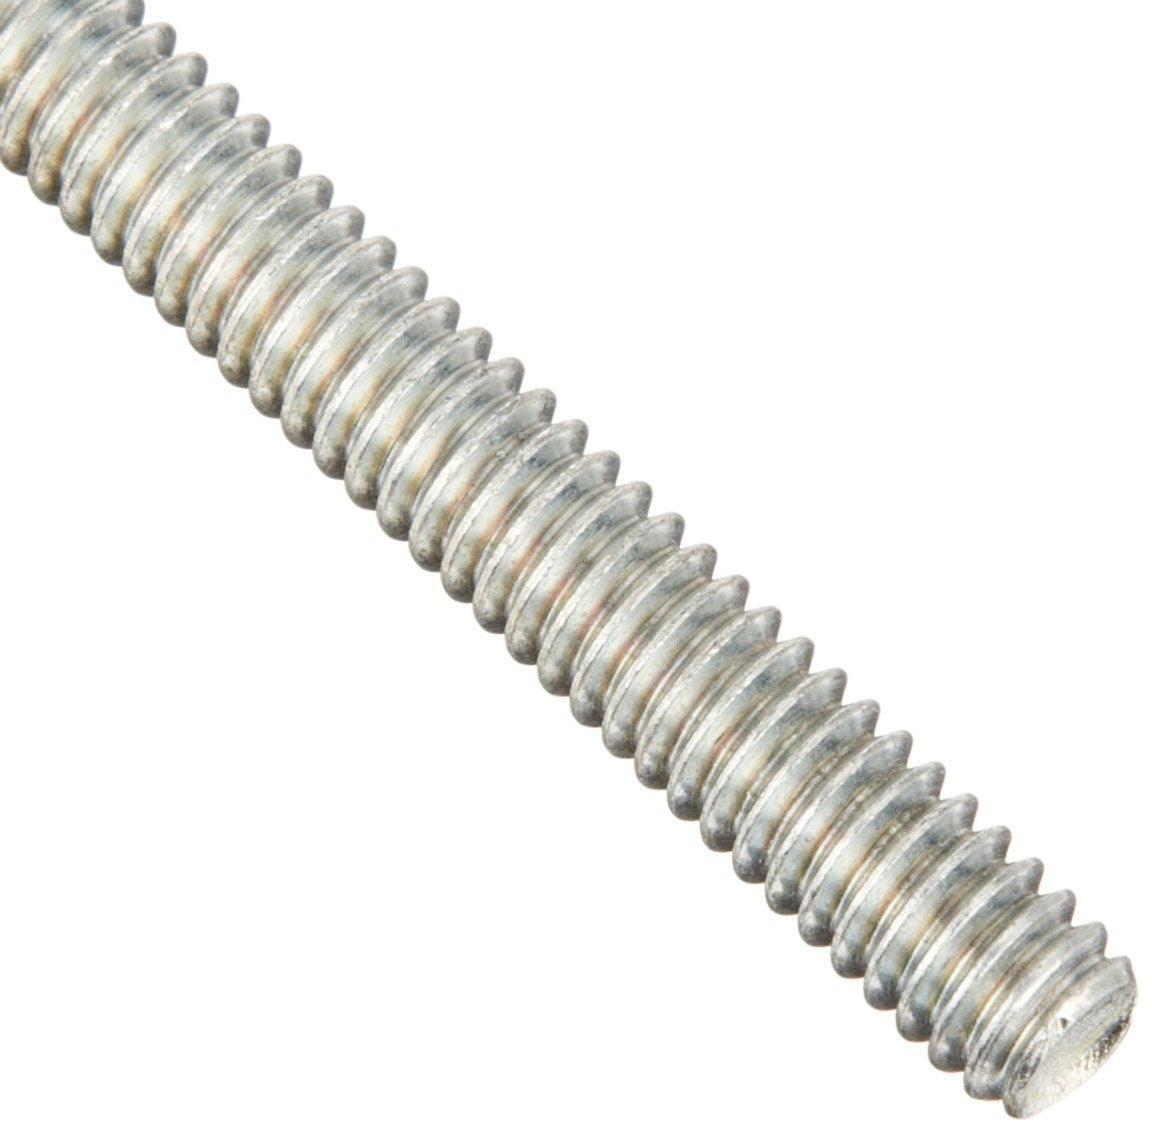 Assorted Screwed Rod Metric 6-12mm | Qty: 25 - 